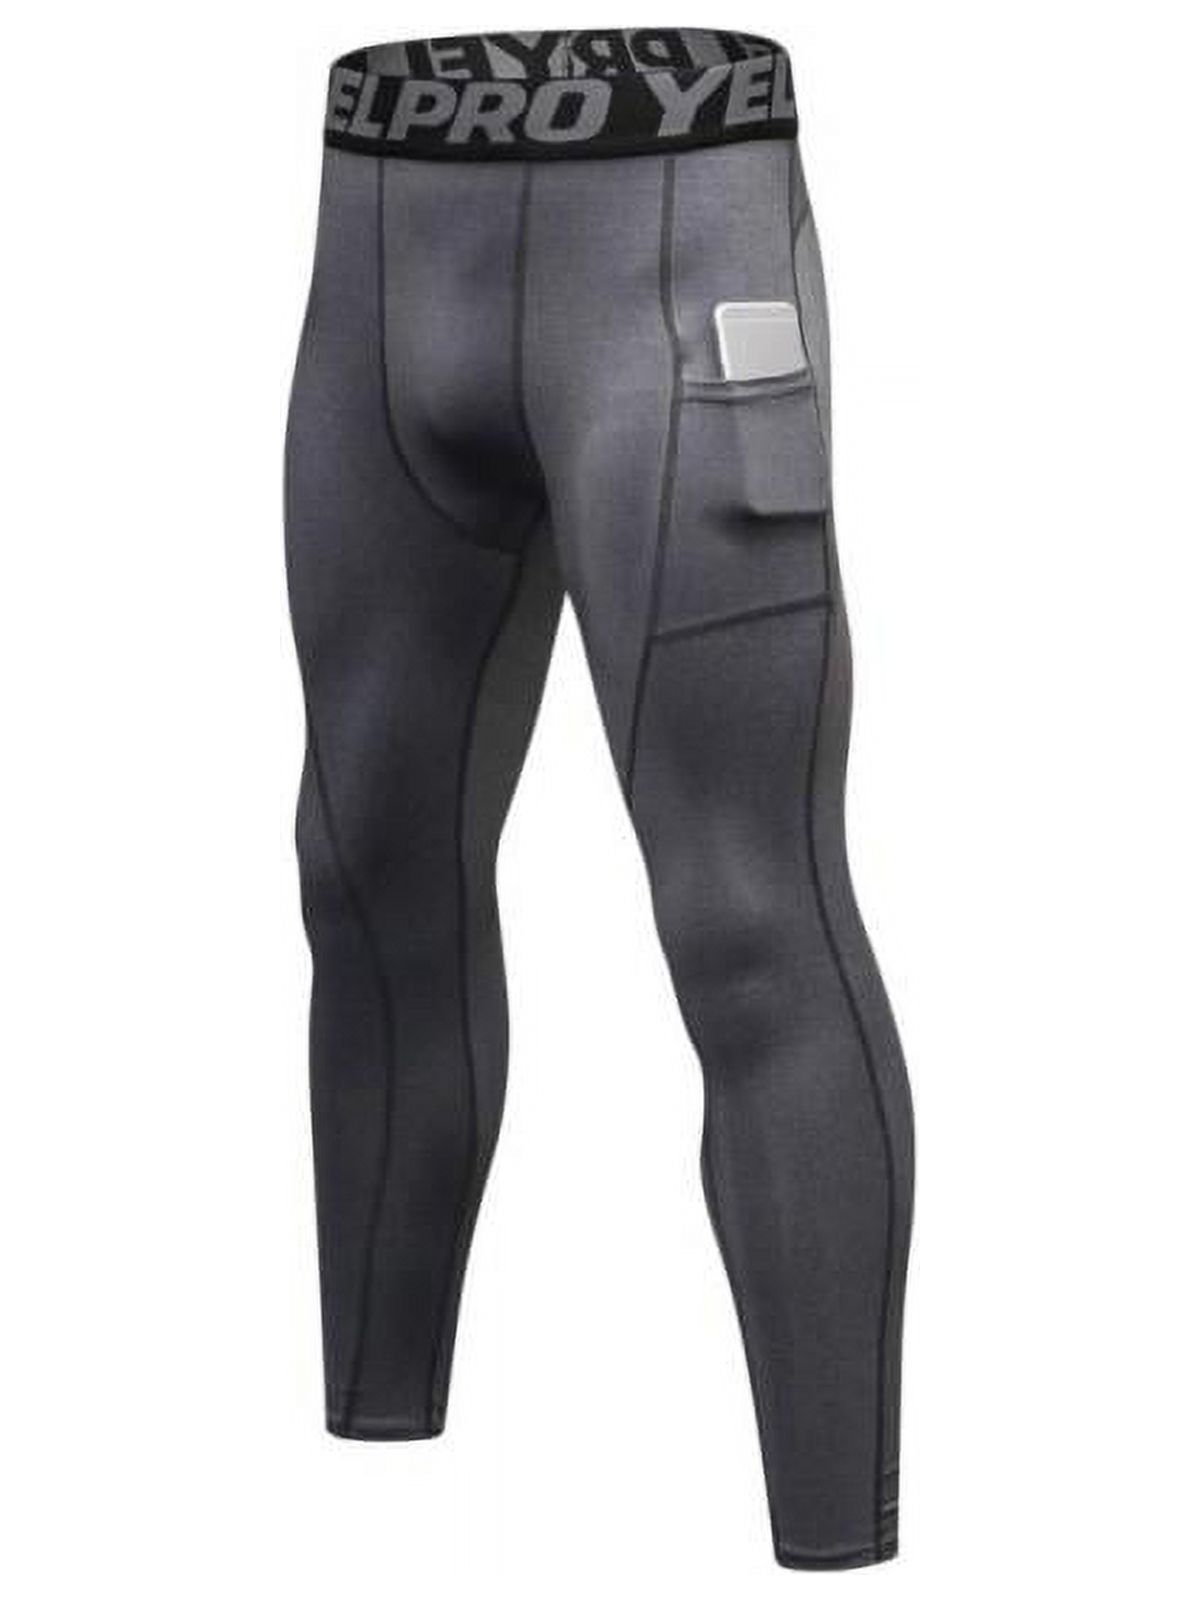 Leezo Men's Compression Pants Running Baselayer Cool Dry Sports Tights Out Pocket - image 1 of 2